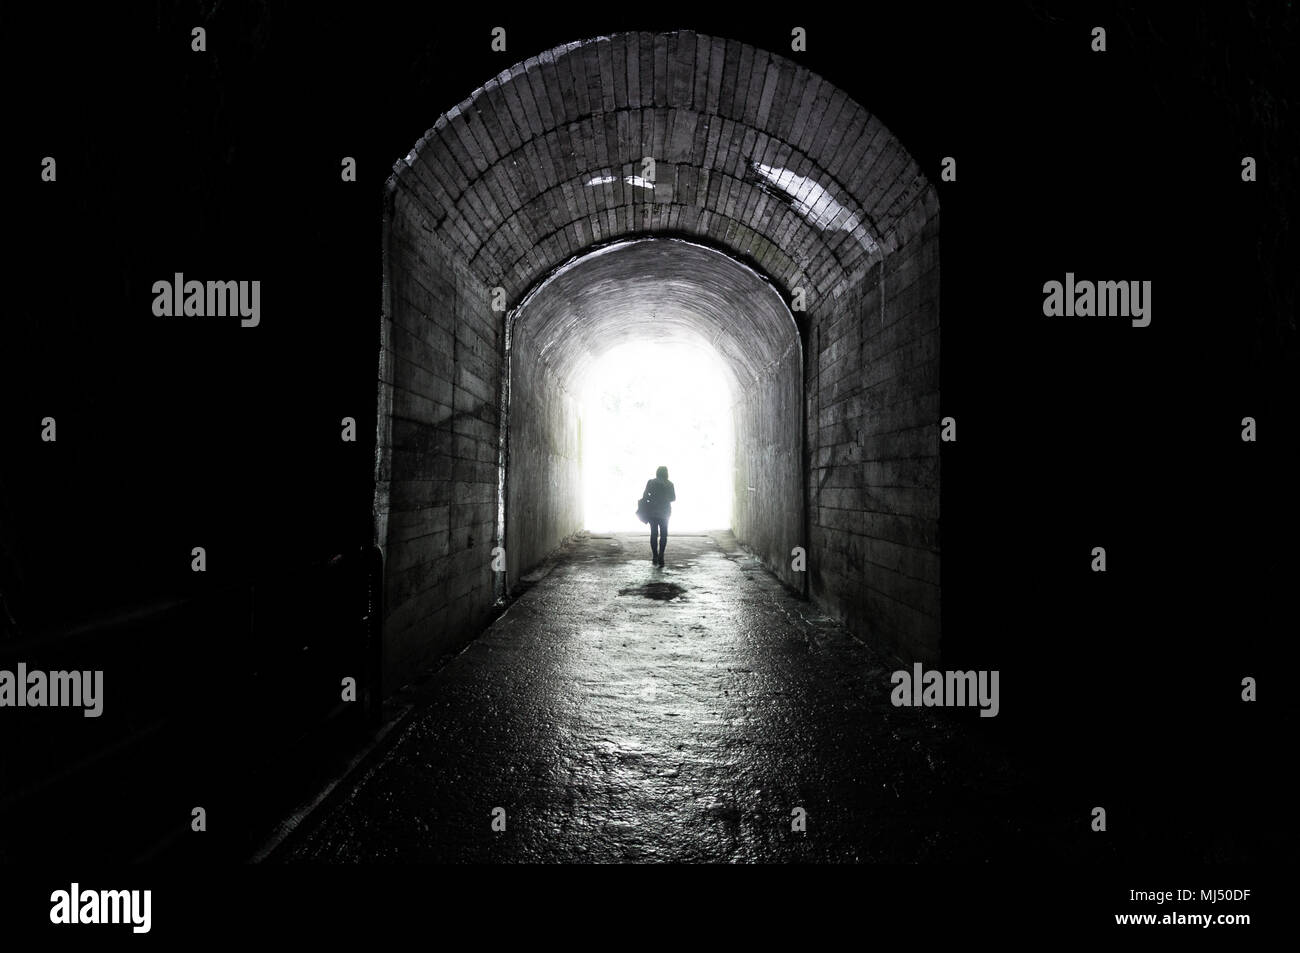 There S Always Light At The End Of The Tunnel You Just Gotta Keep Moving Anonymous Stock Photo Alamy